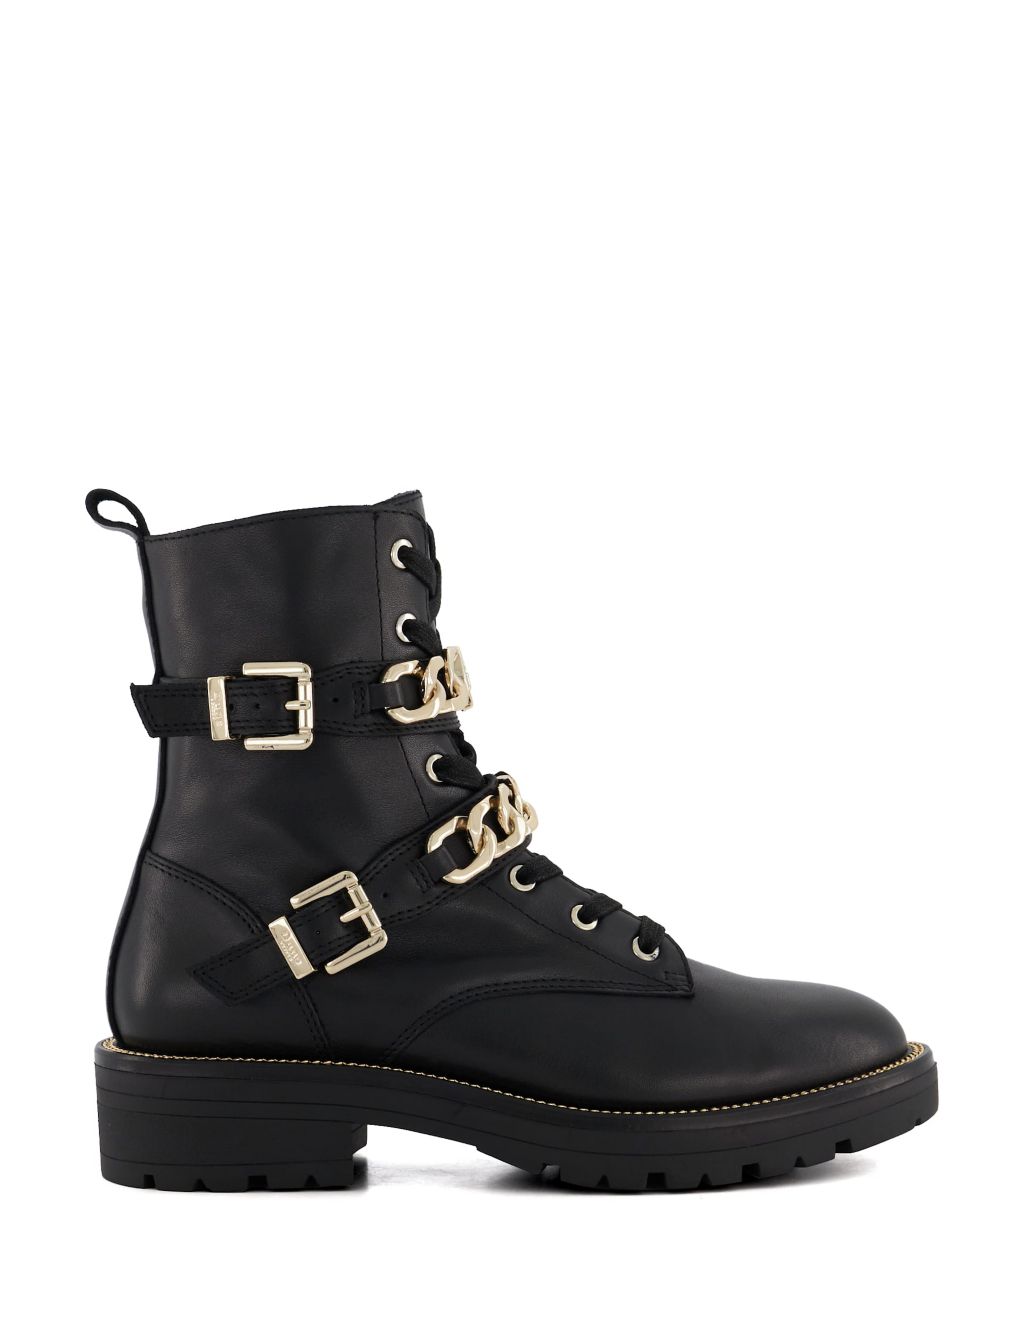 Leather Biker Lace Up Flat Ankle Boots